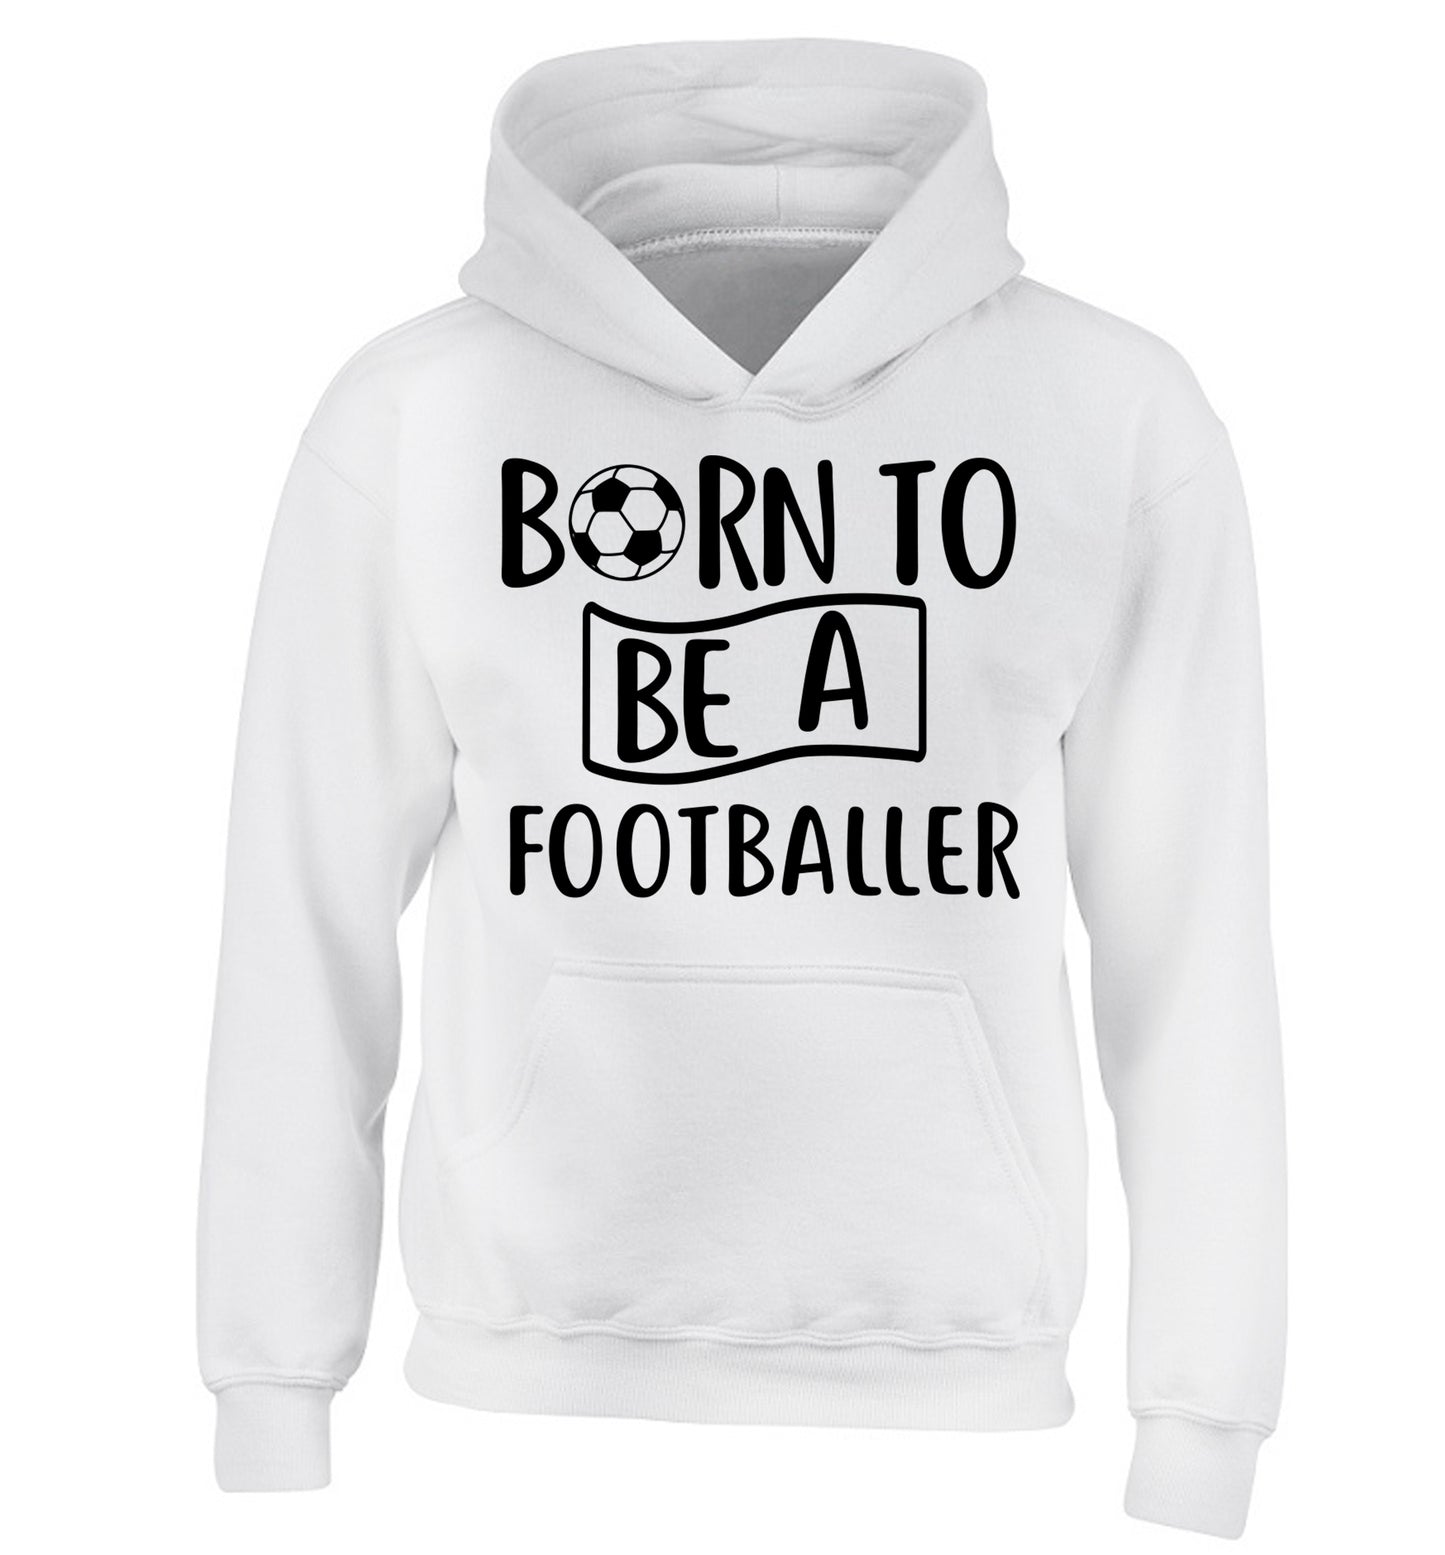 Born to be a footballer children's white hoodie 12-14 Years